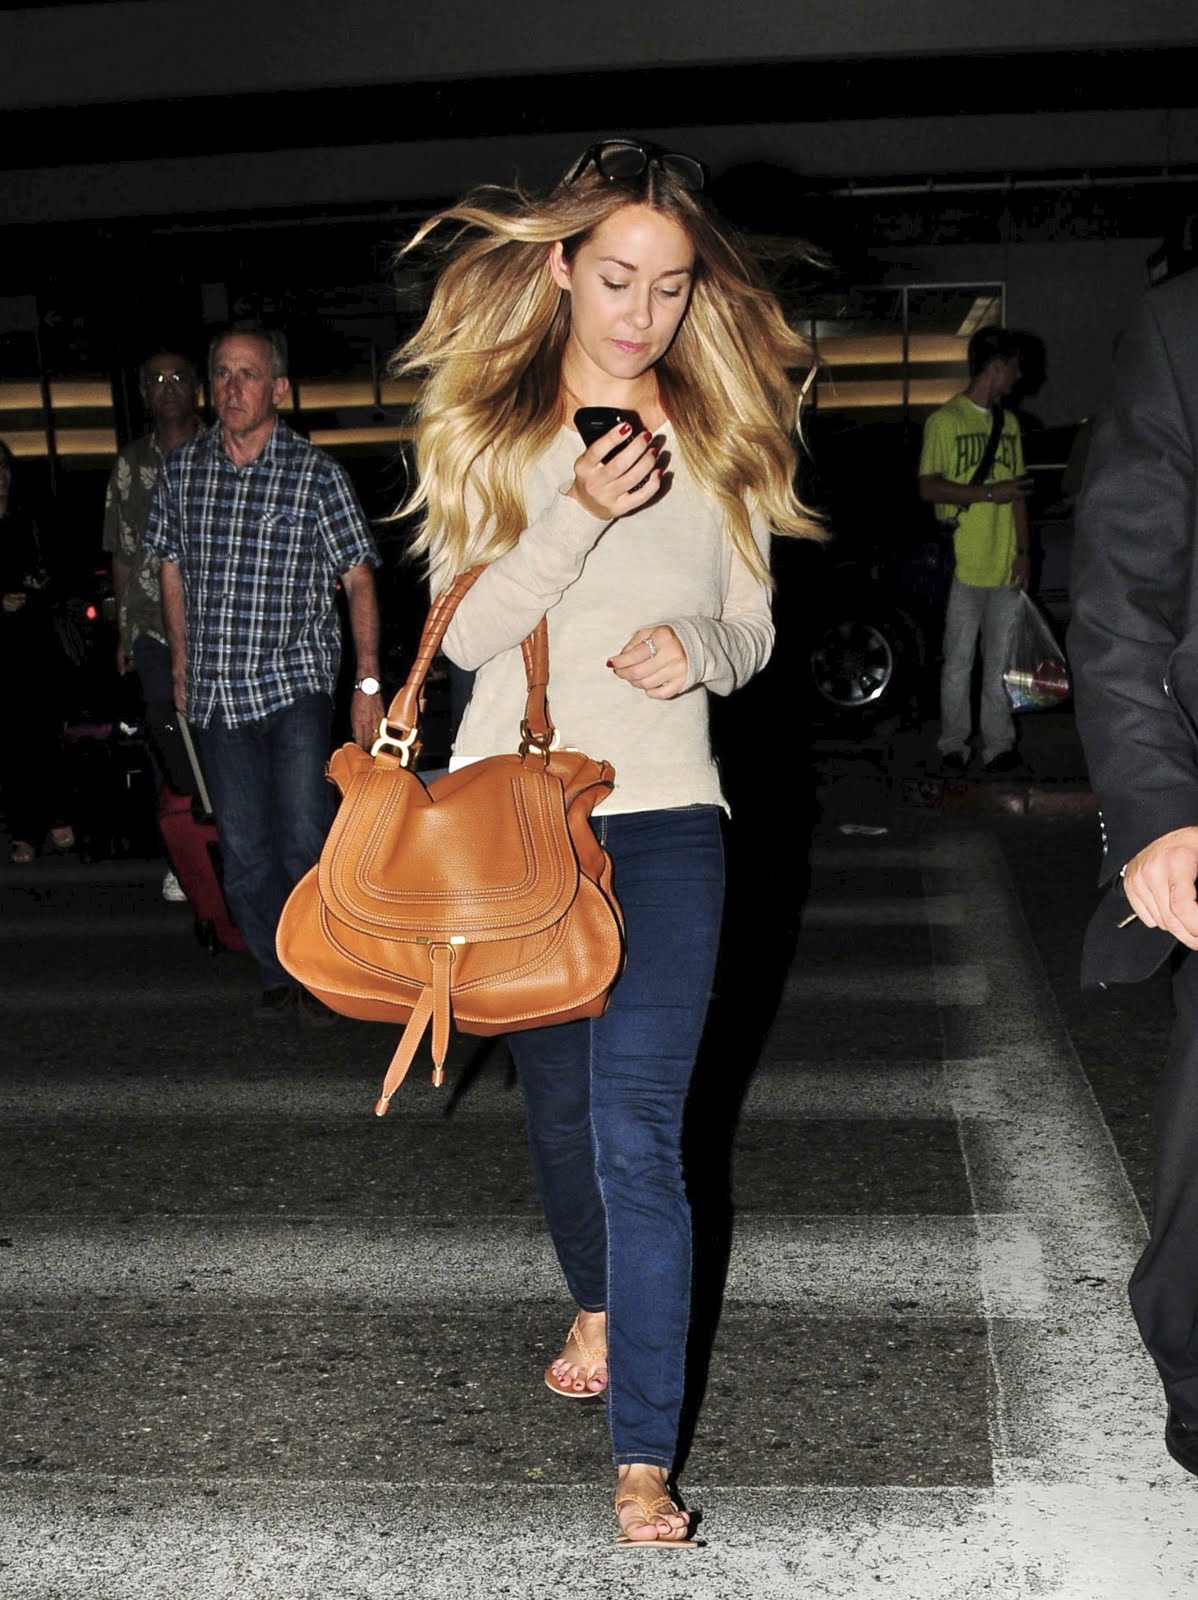 Lauren Conrad at LAX Airport October 26, 2009 – Star Style